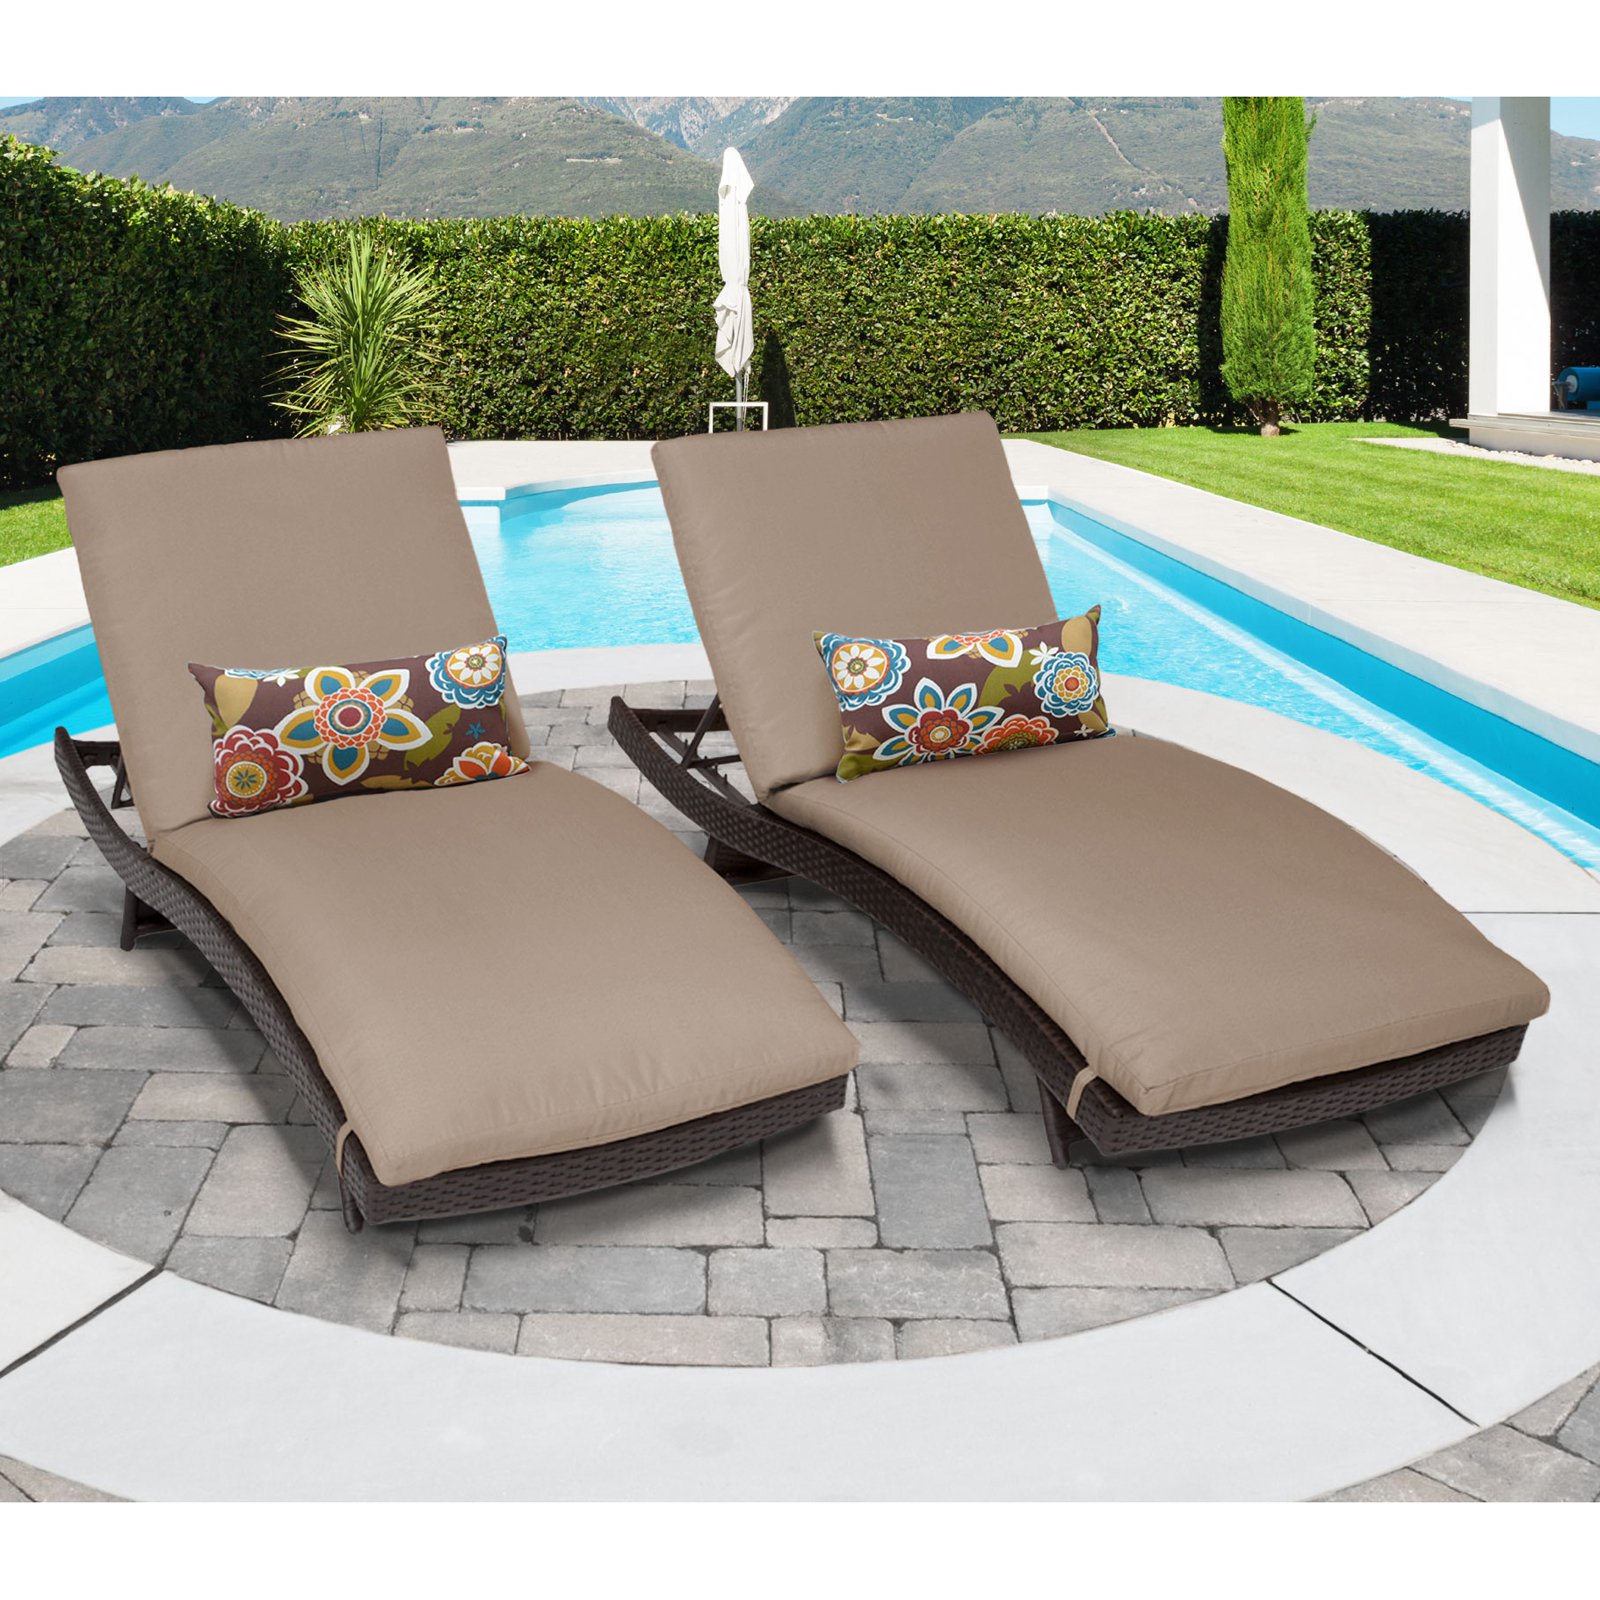 Barbados Curved Chaise Outdoor Wicker Patio Furniture in Tangerine (Set of 2) - image 3 of 4